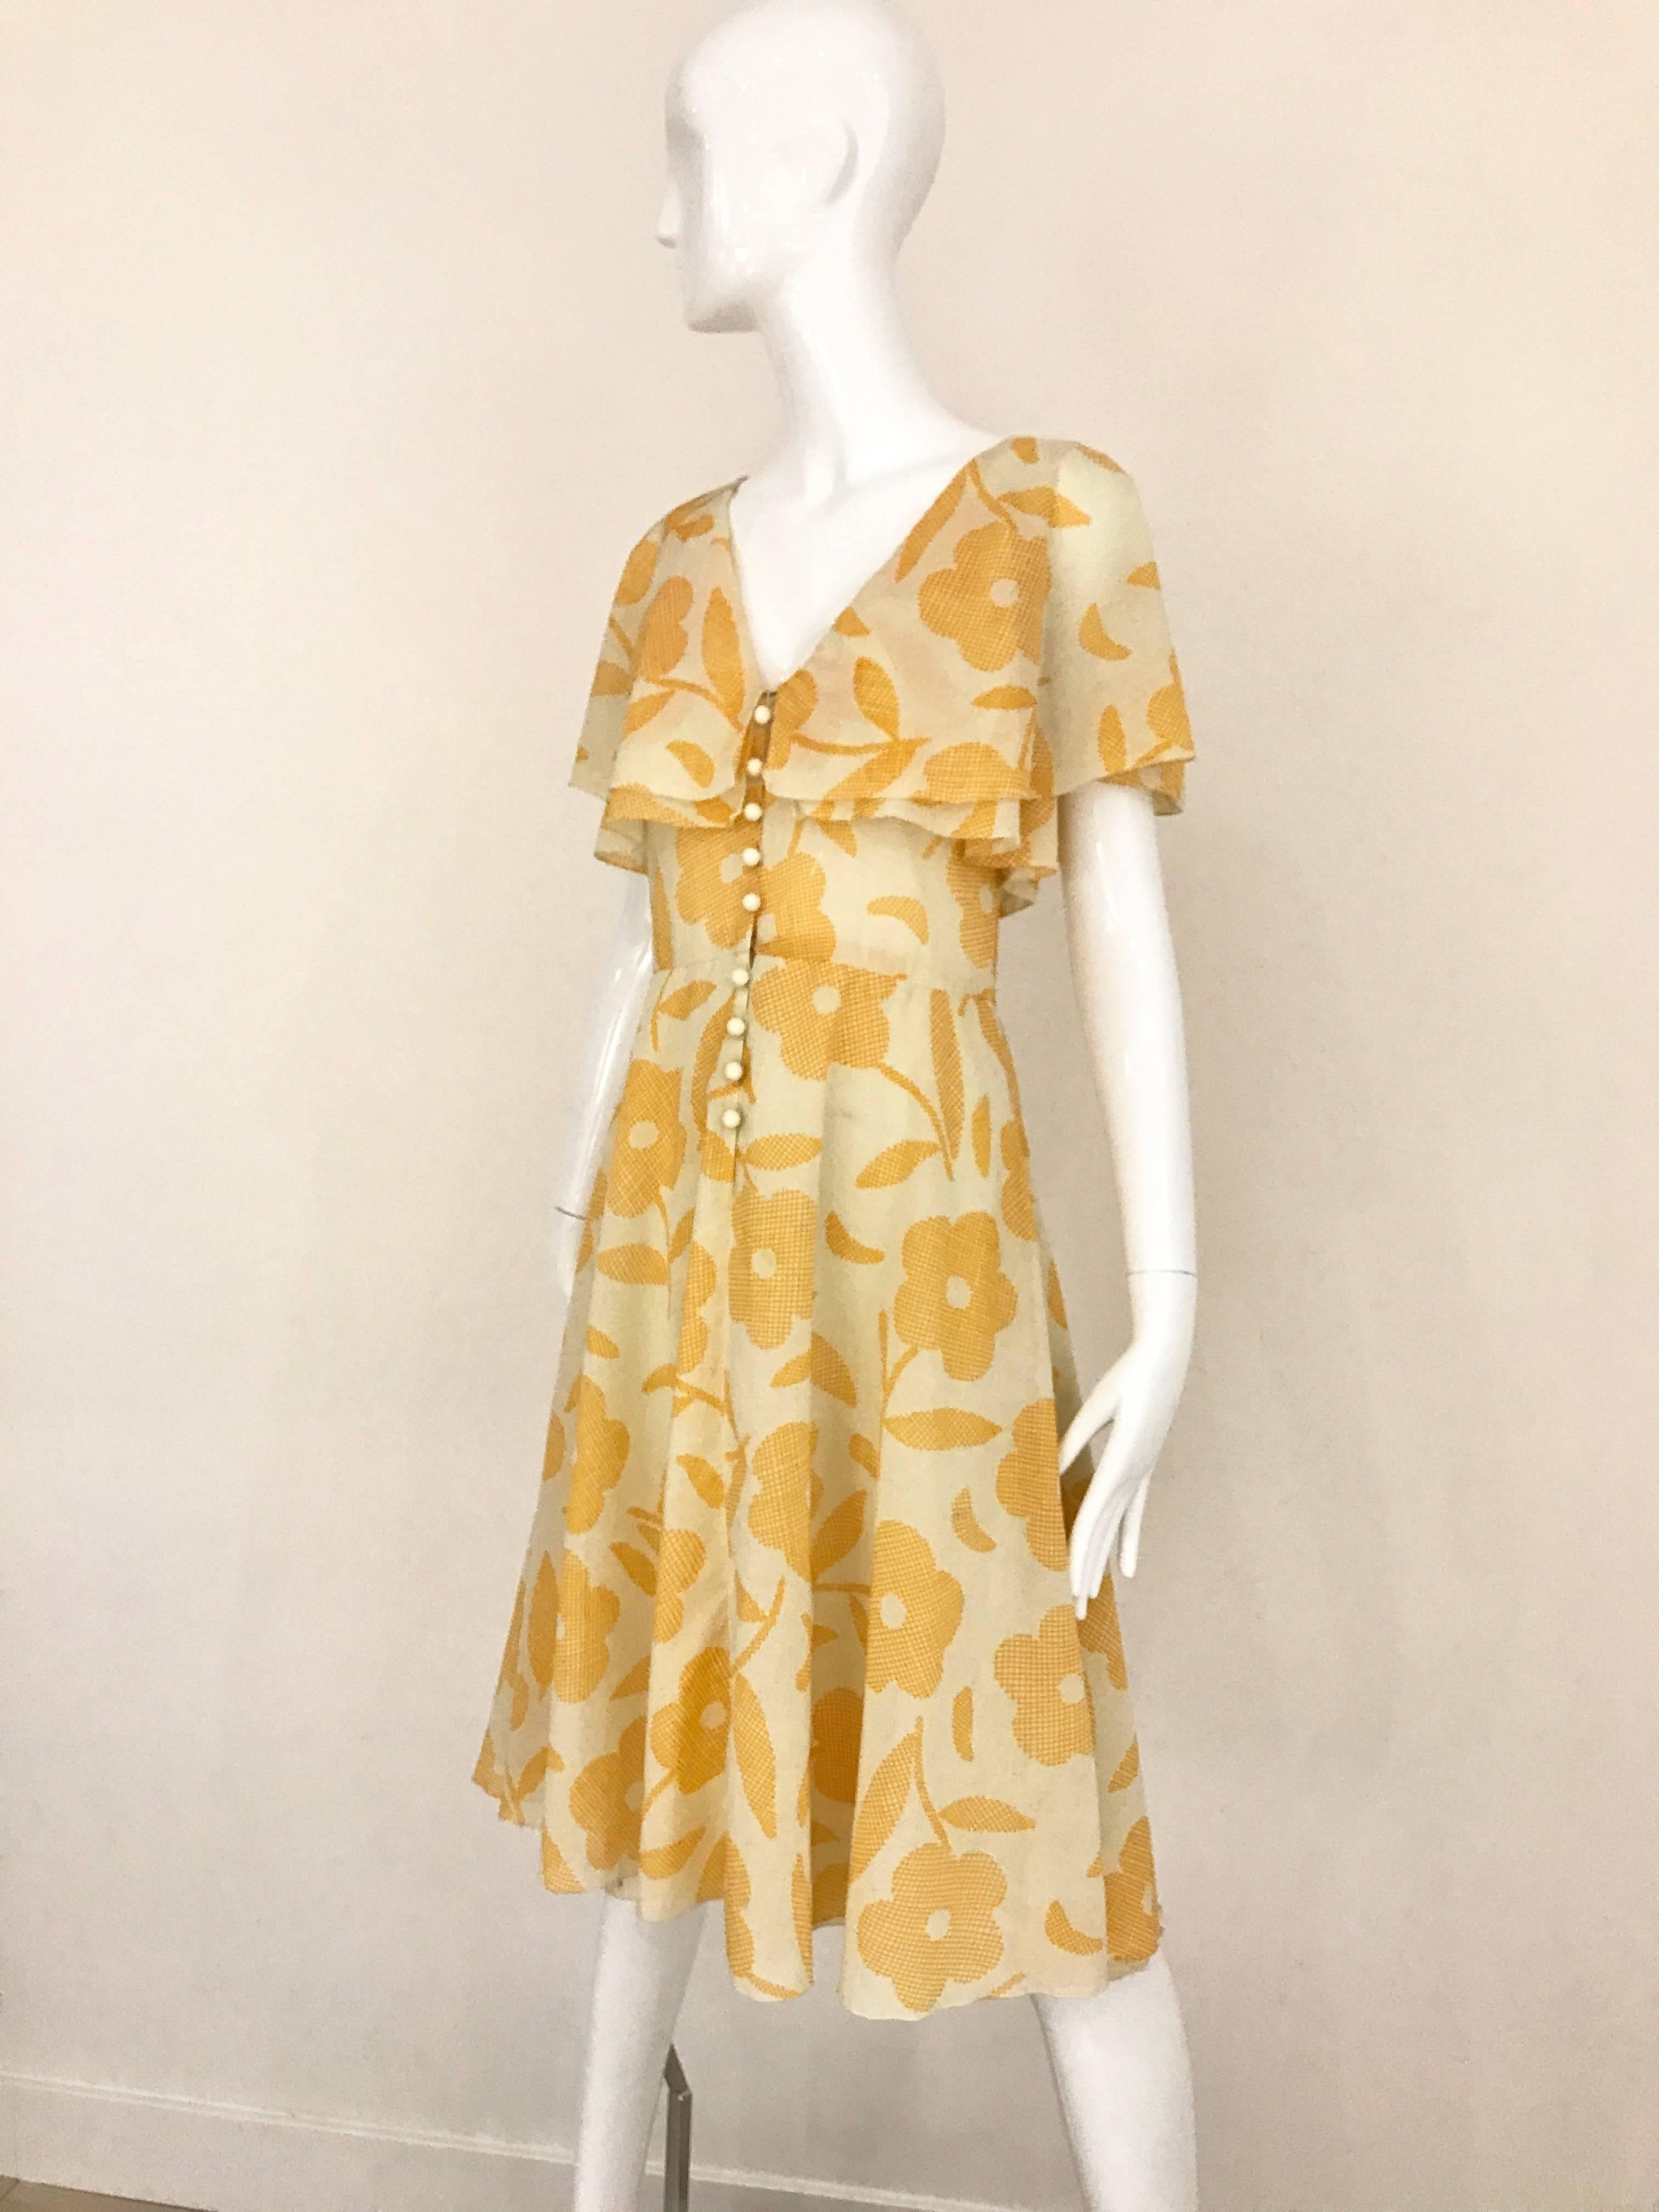 1990s CHLOE  V neck Yellow and Cremel Flower Print Cotton Vintage  day Dress. Creme acrylic button in the front, and double layer flutter sleeve.
Size:  4 / Small
Bust: 32 inch  / Waist: 27 inch/ Length: 41 inch

** lining has small tear not see